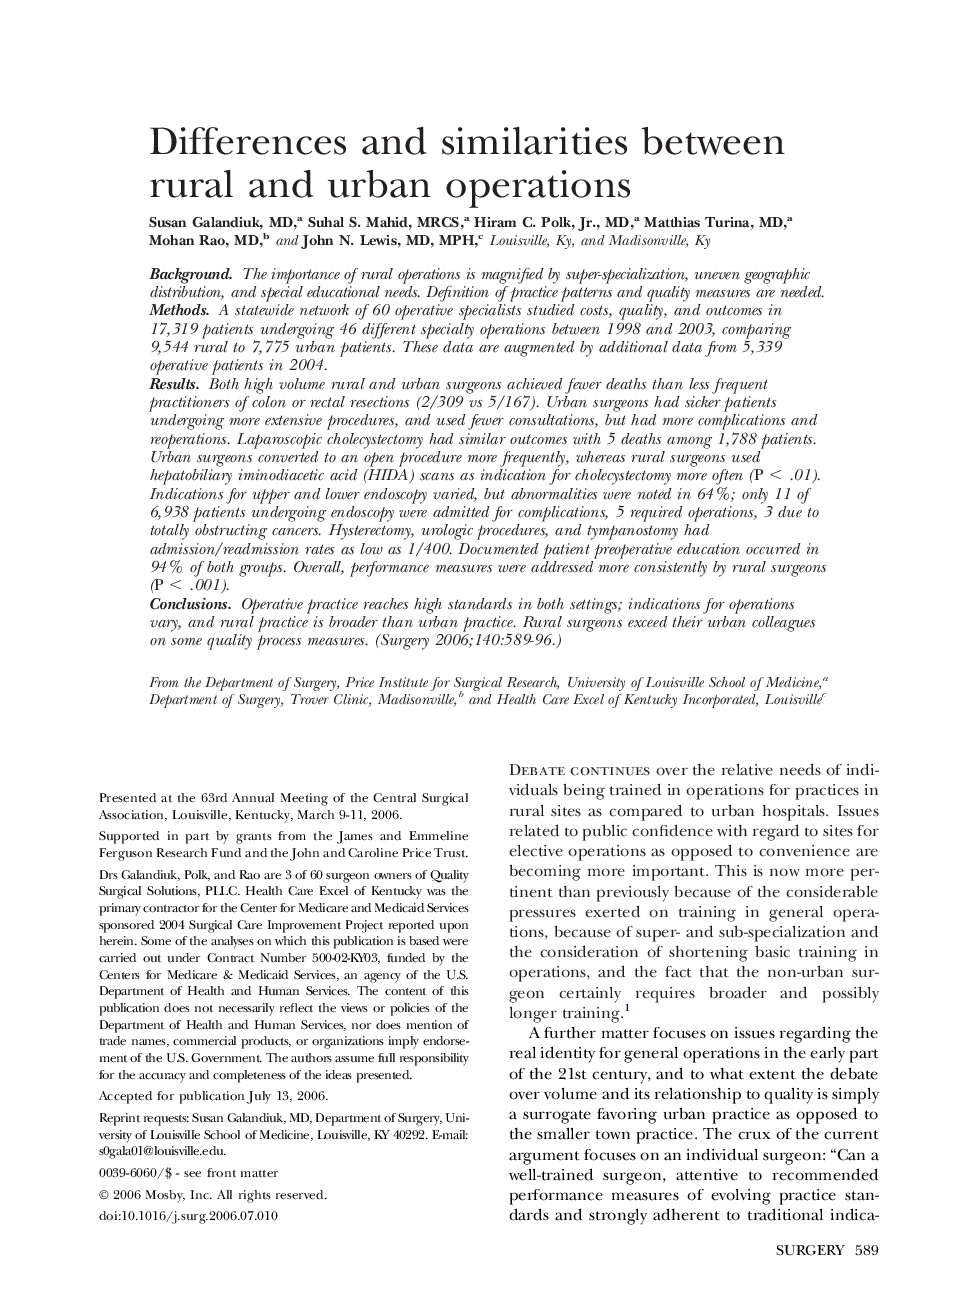 Differences and similarities between rural and urban operations 